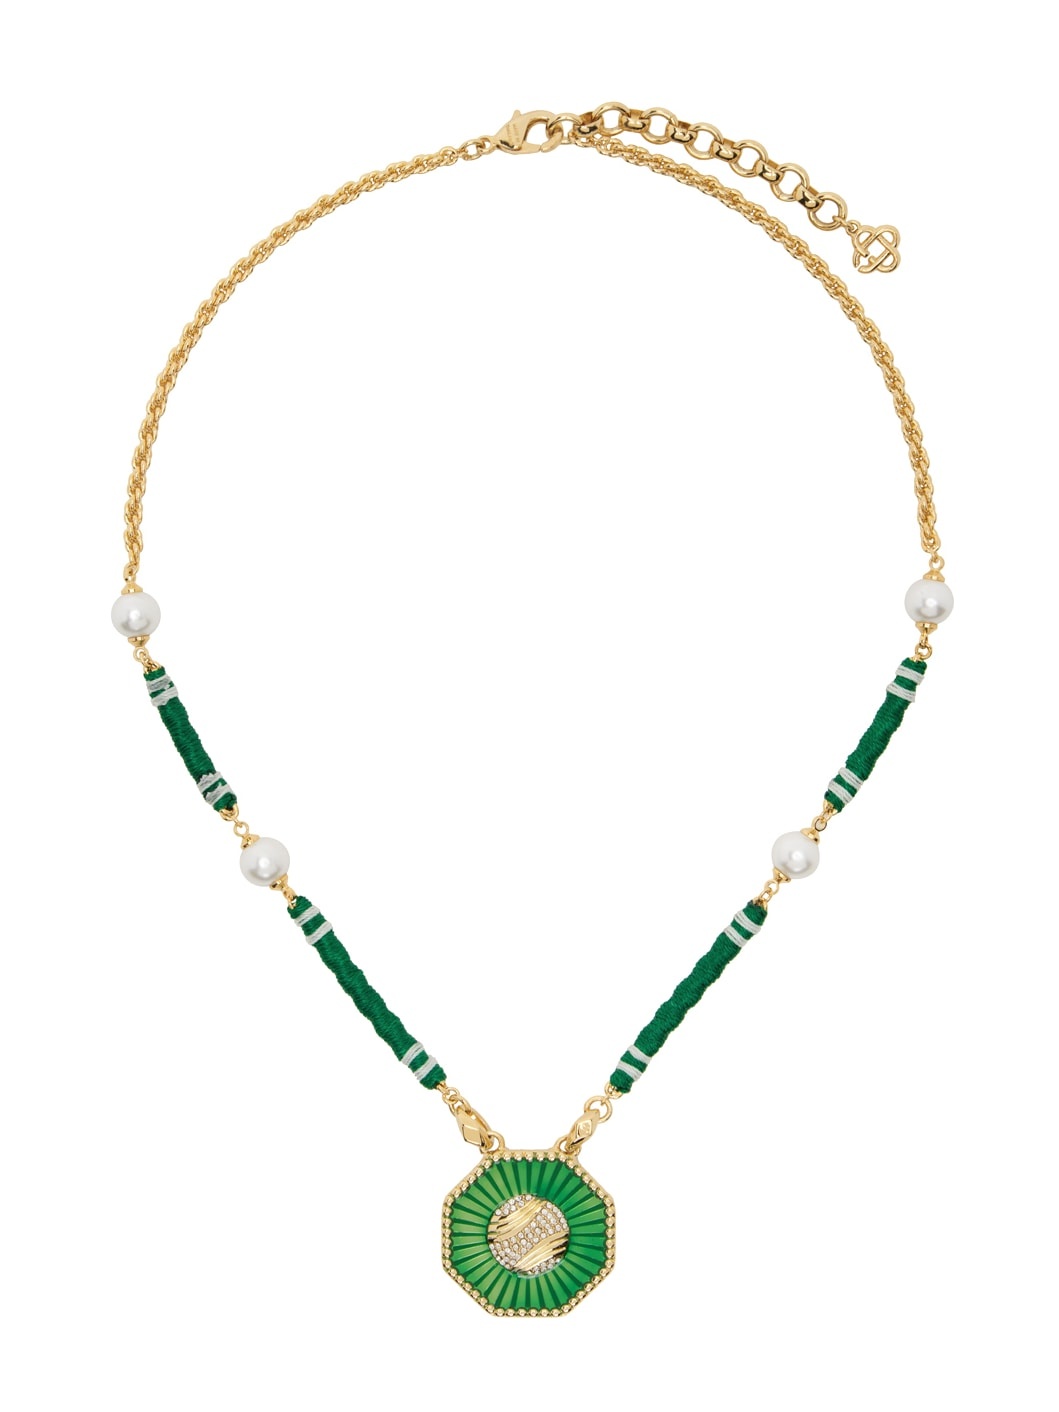 Gold & Green Crystal Tennis Ball Necklace - 1